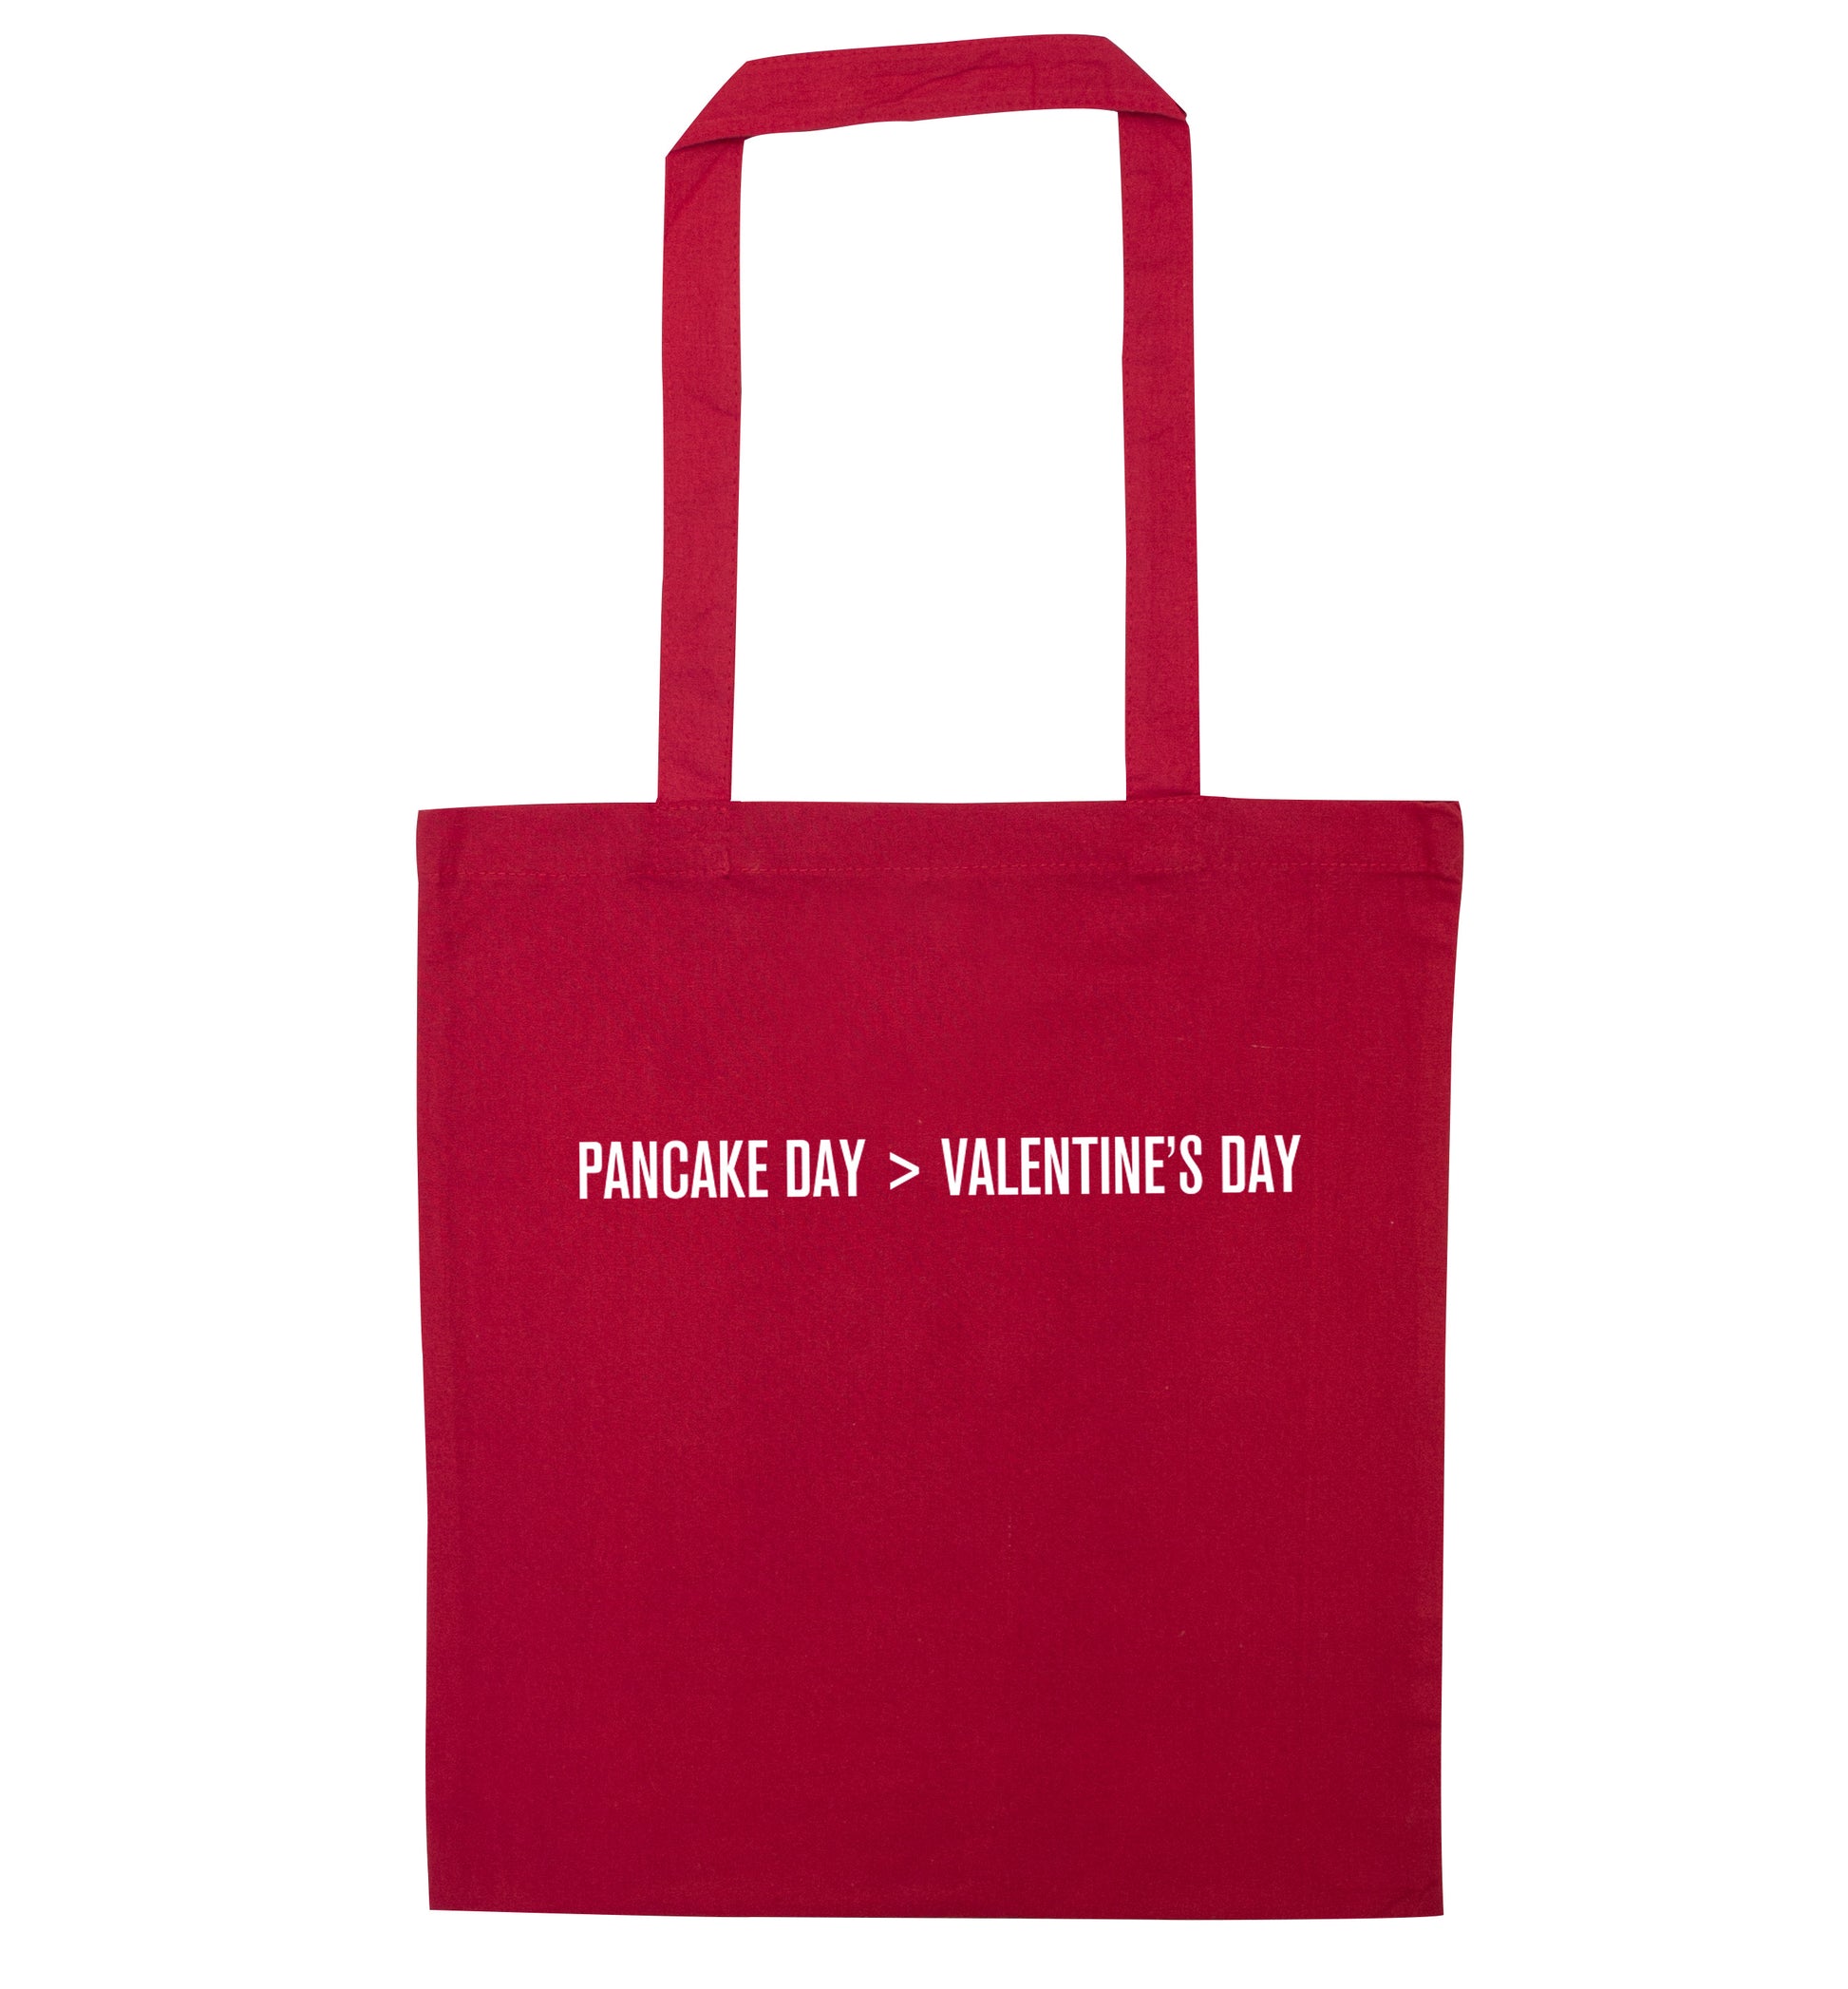 Valentine's day > pancake day red tote bag